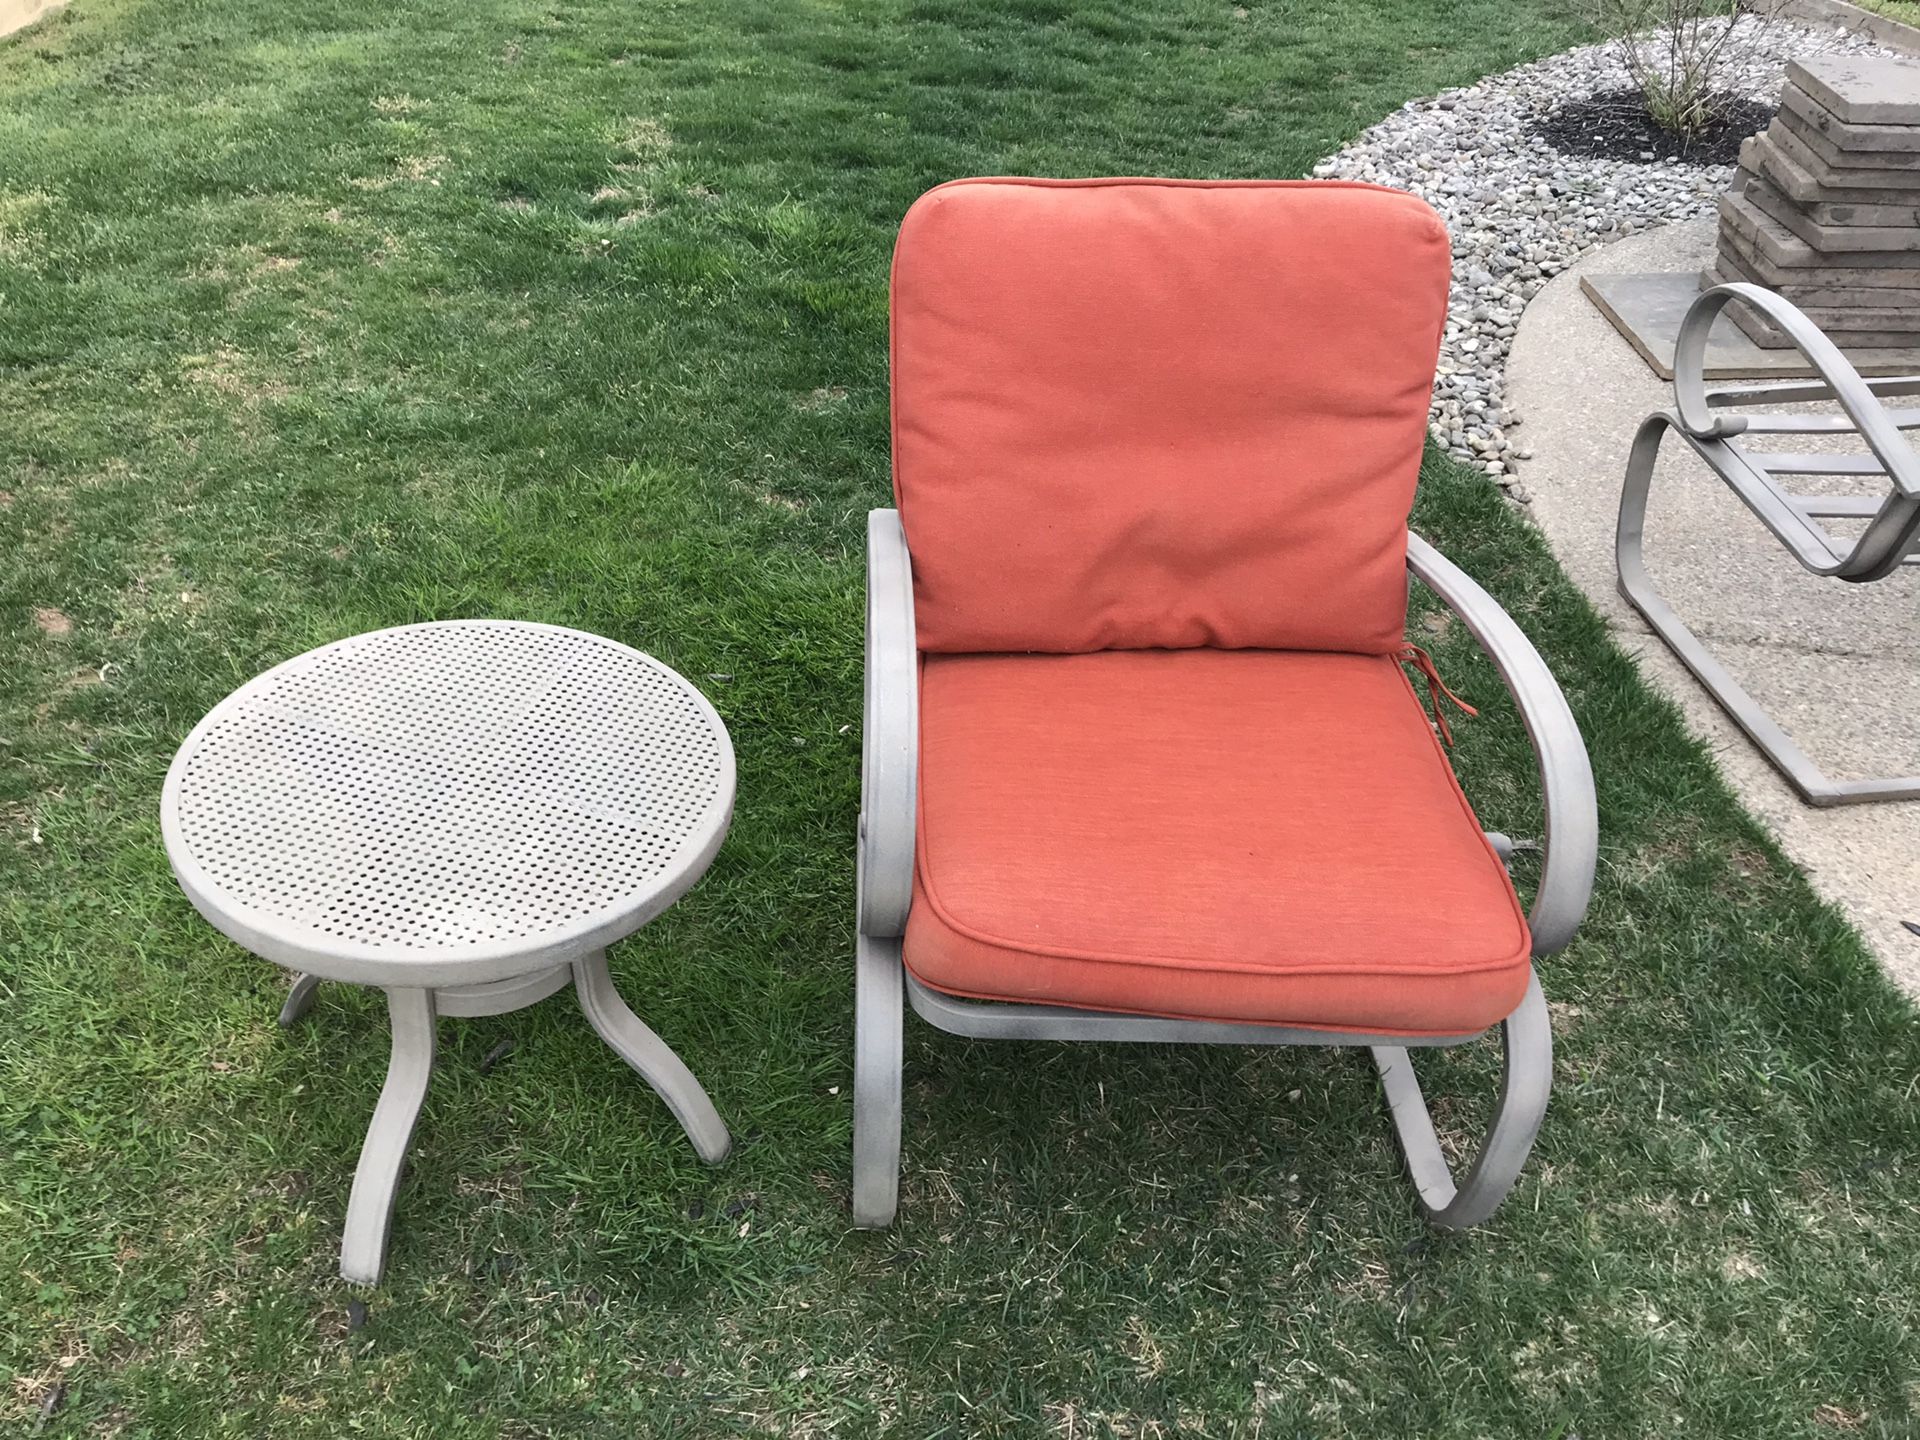 Outdoor furniture. 4 chairs with cushions and two tables as shown in picture.